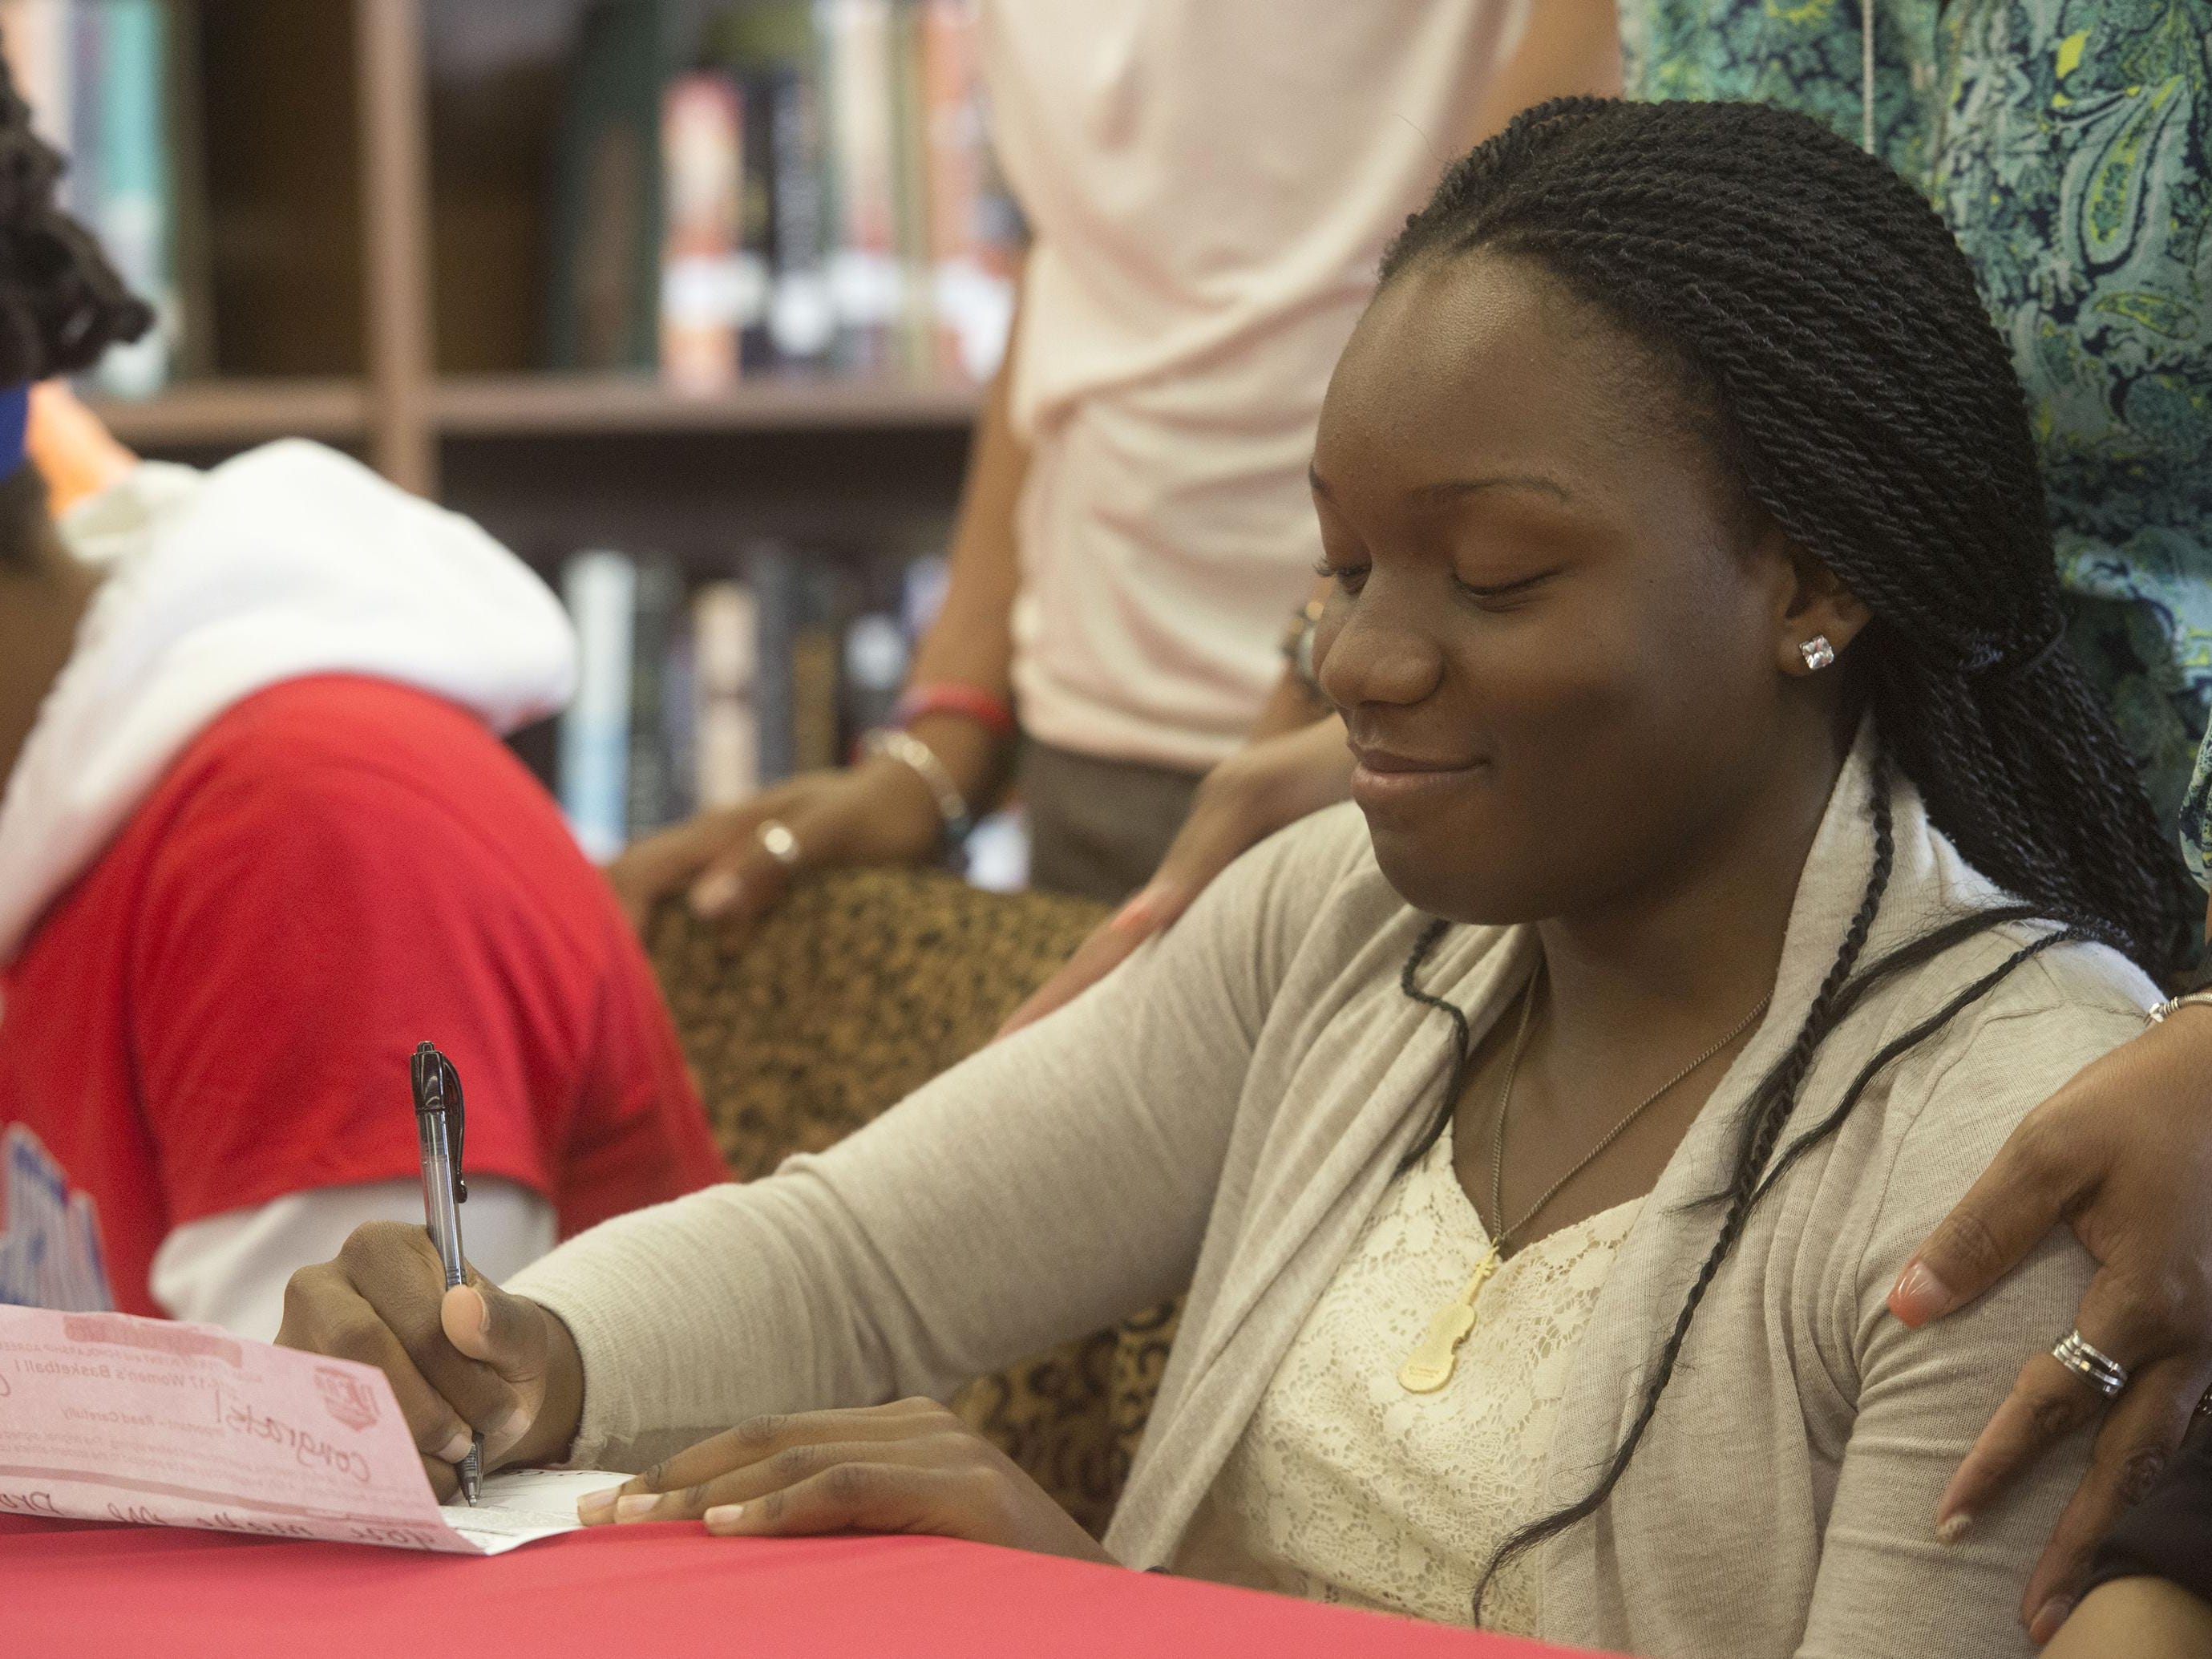 West Florida High School basketball standout Faithe Franklin has decided to stay home and play basketball for University of West Florida. Franklin signed a basketball scholarship with UWF during a ceremony at the high school Friday morning.